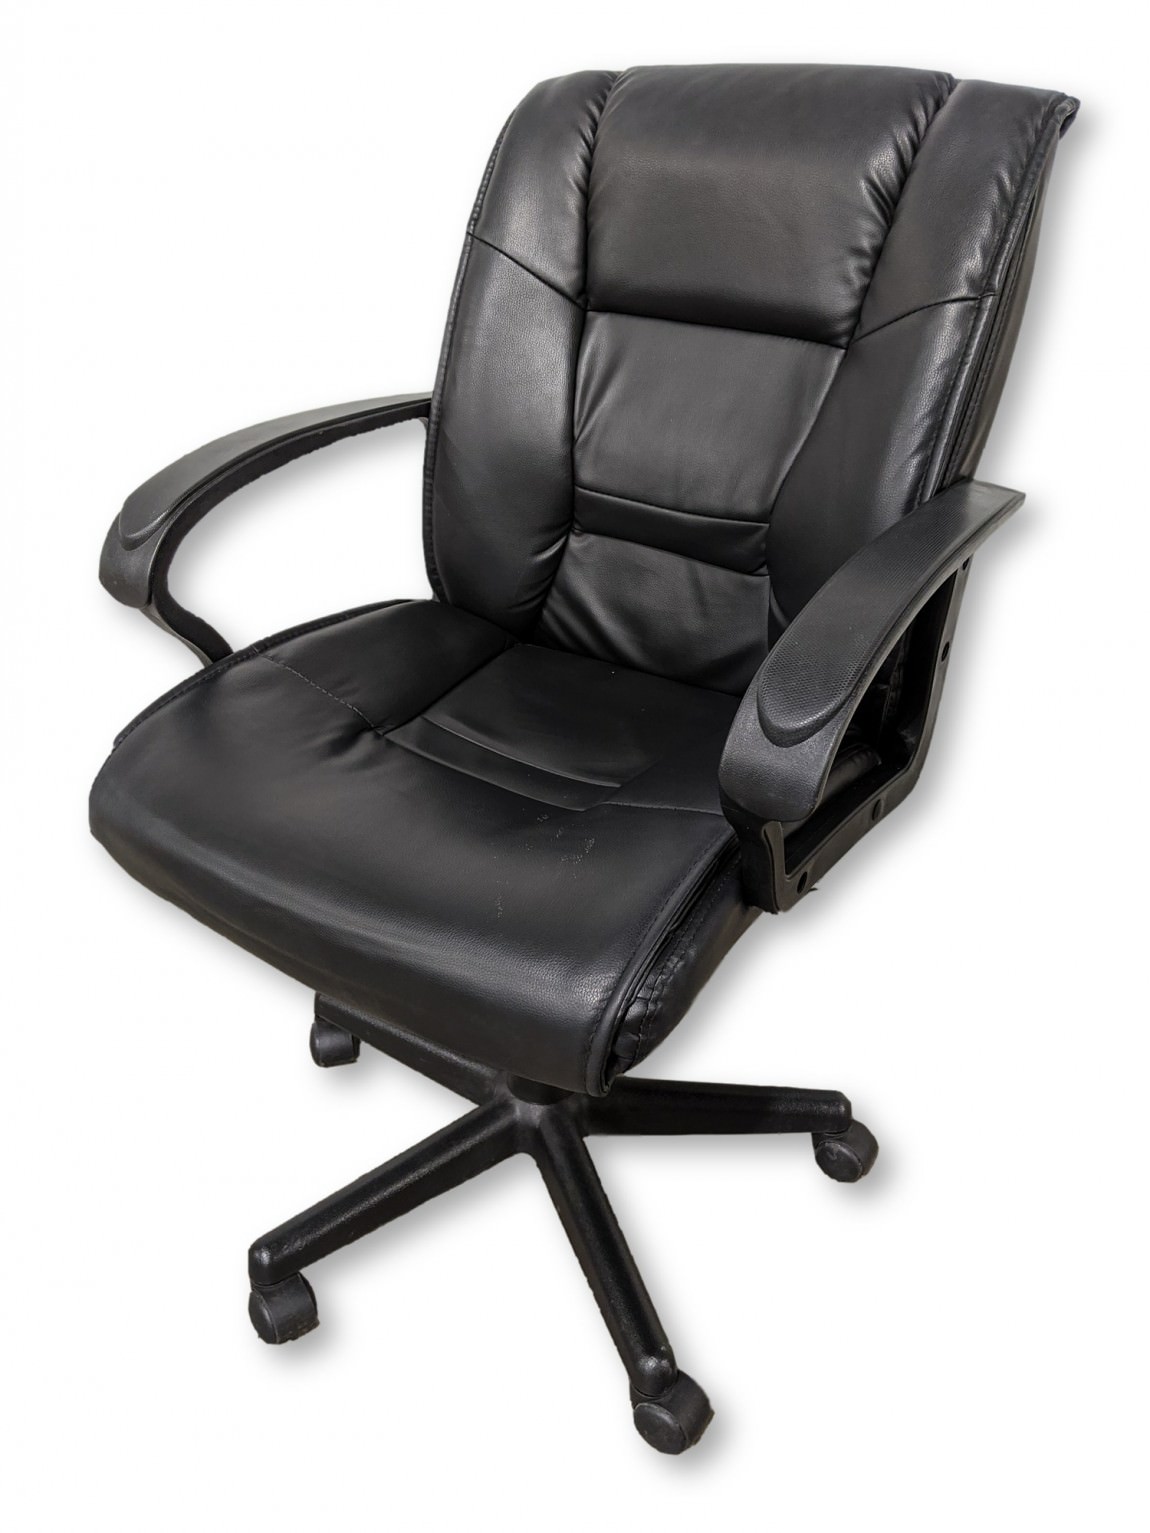 Black Vinyl Rolling Office Chairs